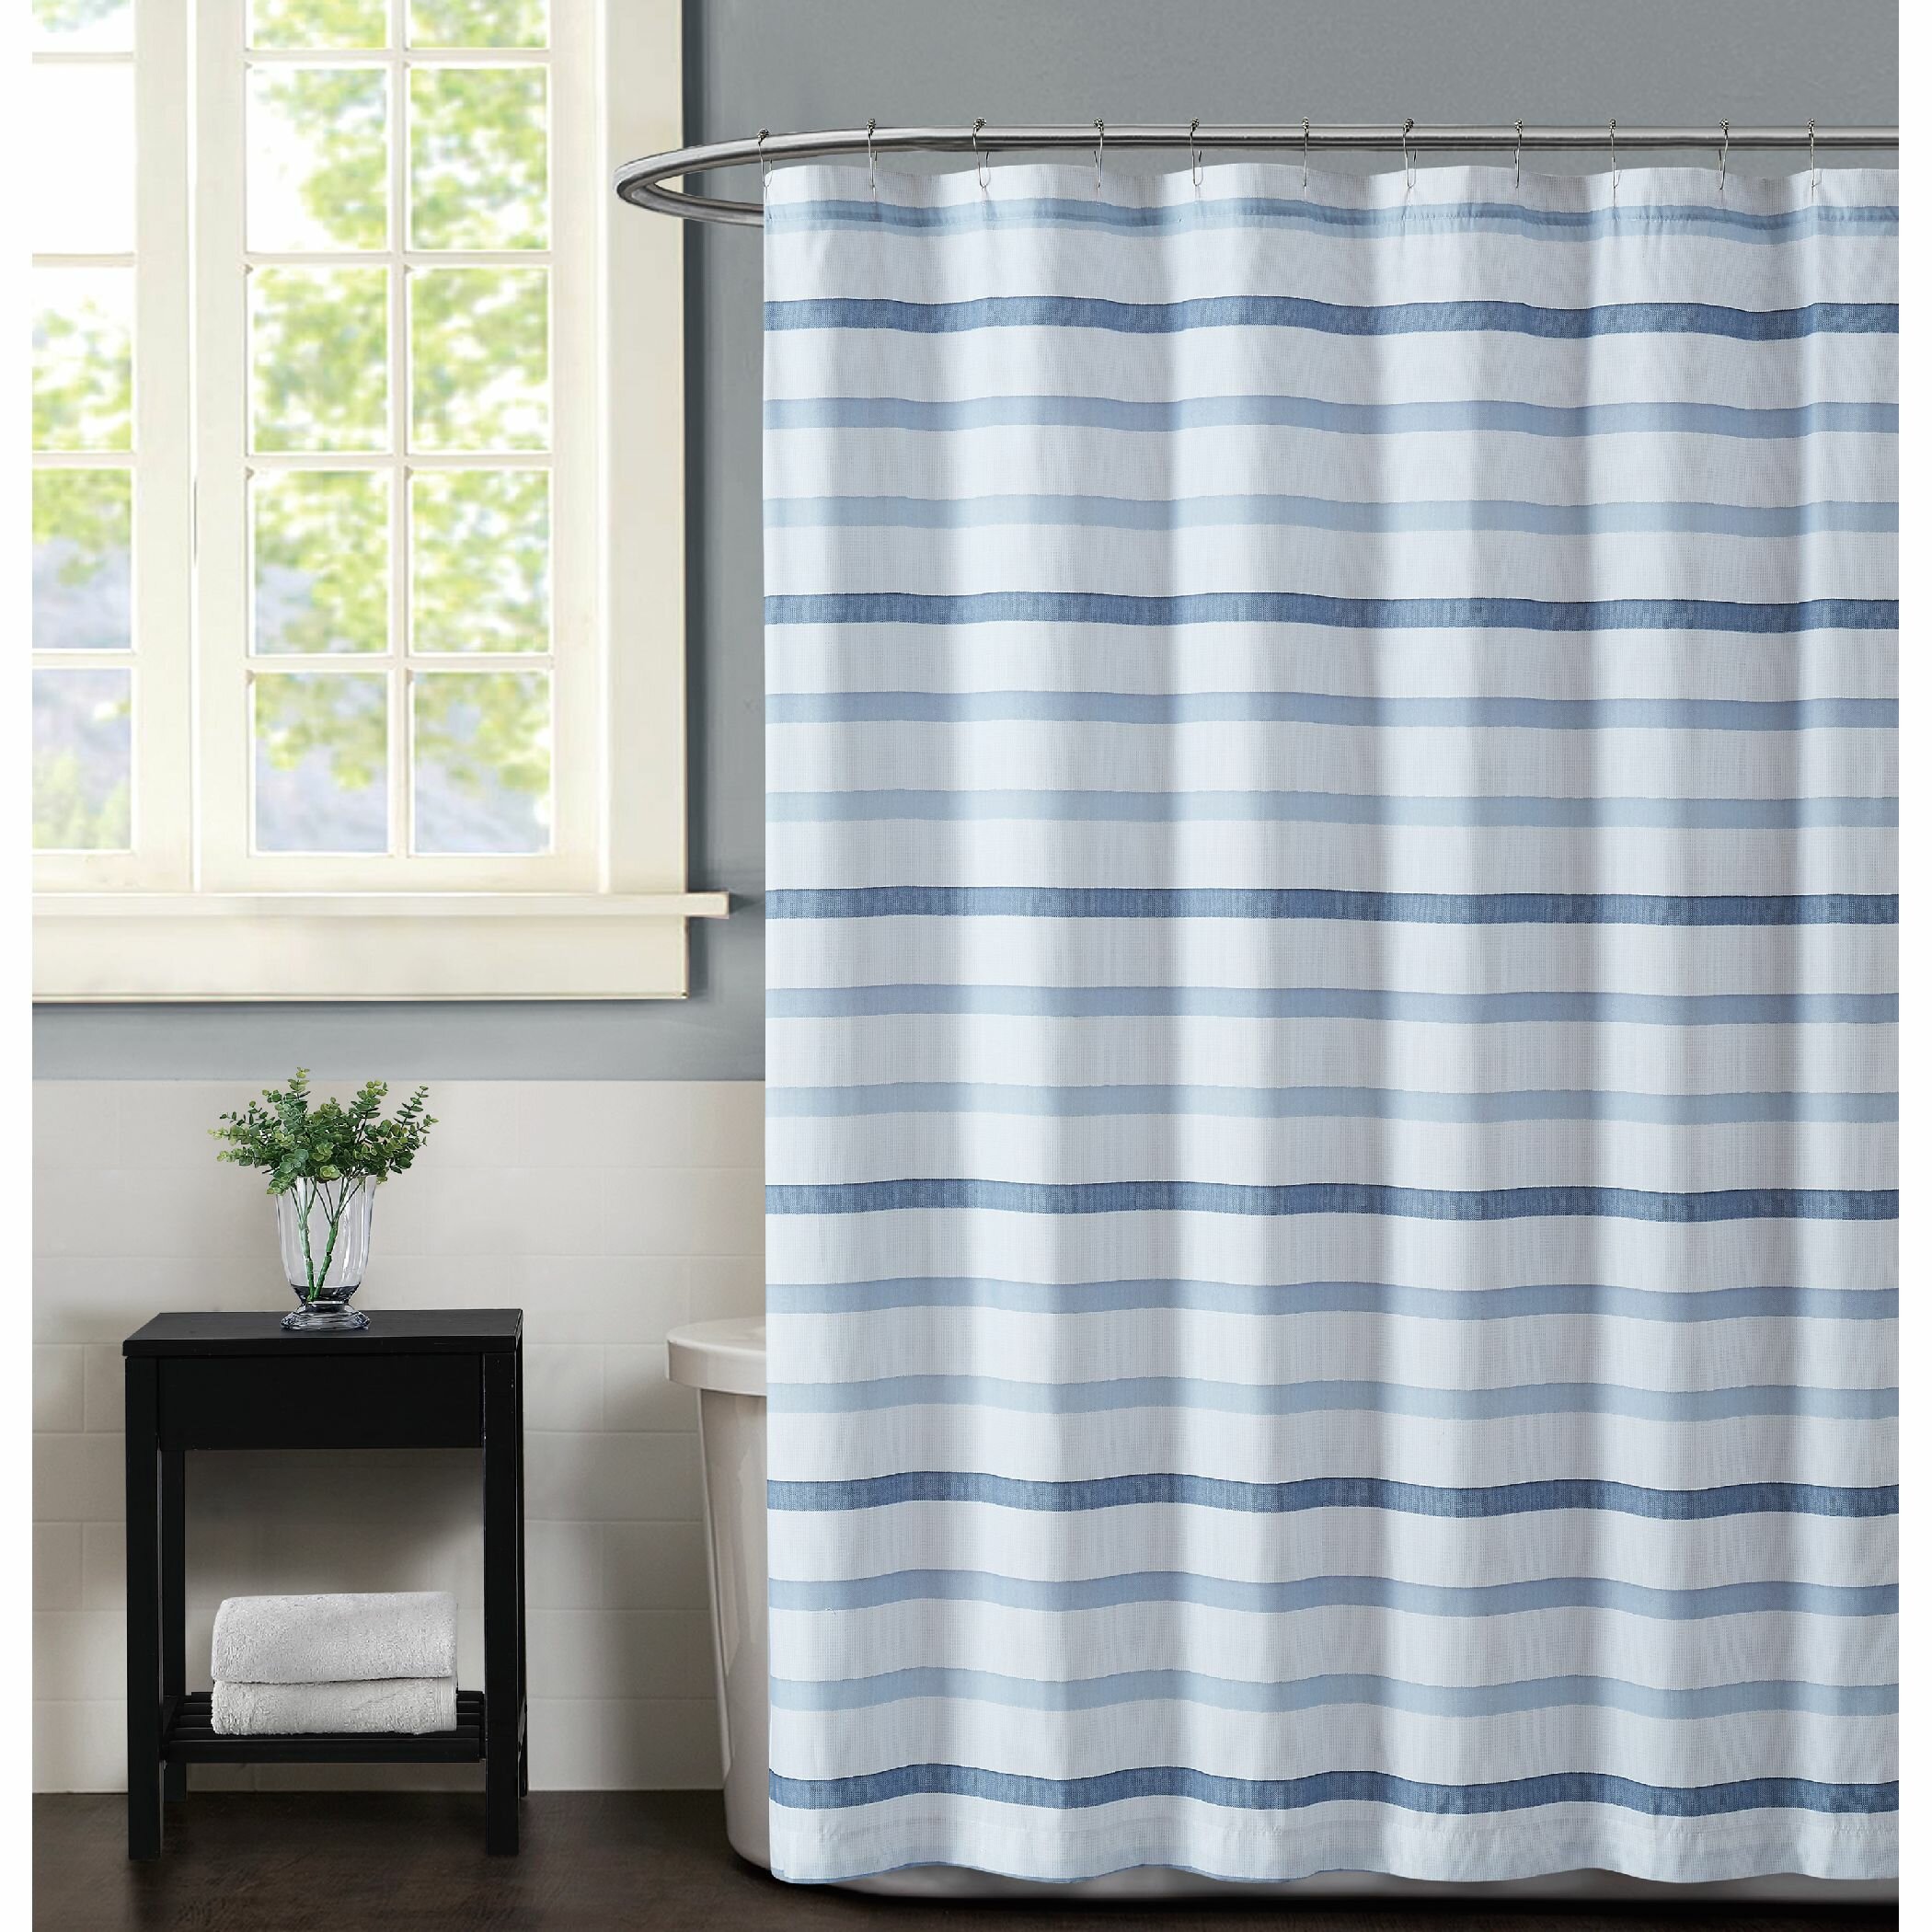 Water Resistant Details about   West Lake Blue White Stripe Shower Curtain,Waffle Weave Texture 